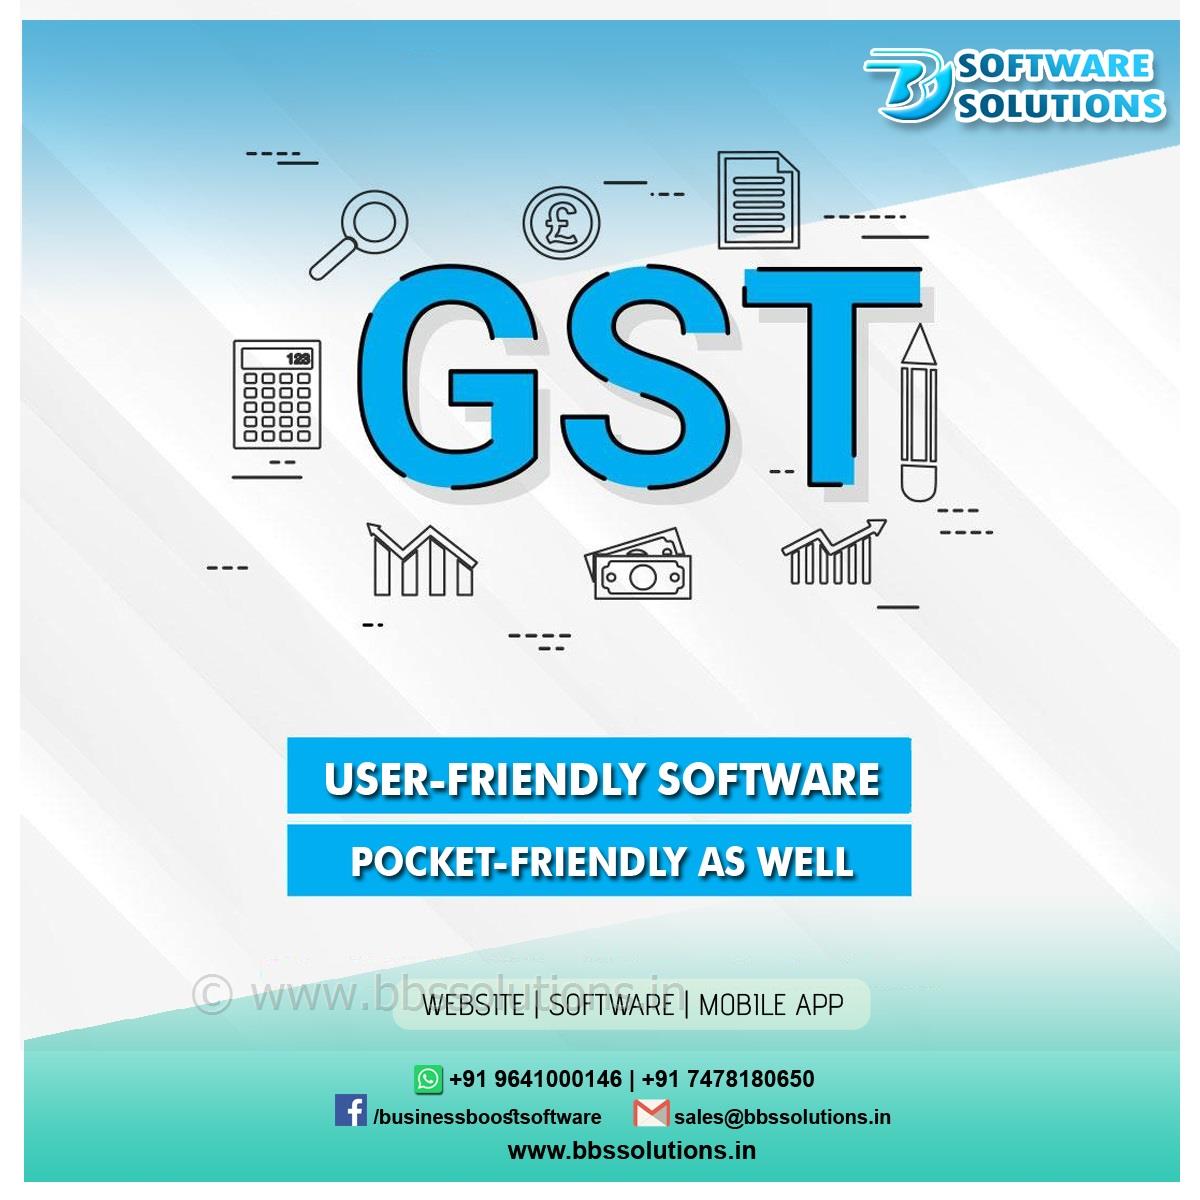 Transform Your Business with Advanced GST Software: Automated Messagin...  Business Boost Software Solutions do Best Software ,Web Development,Mobile App solutions provider in siliguri , india, WestBengal , Assam , Siliguri , Jalpaiguri ,Dhupguri,
    Best website designing in Siliguri with affordable packages and quick support. Get effective website design in Siliguri from best website designers. #bbssolutions , #SEO  , #DigitalMarketing  , #WebDesign  , #SoftwareDevelopment  , #FacebookAds  , #GoogleAds  , #GoogleSEO  , #WebsiteDesigning 
     , #Software  , #website  , #BusinessBoostSoftwareSolutions  , bbssolutions,SEO, Digital Marketing, WebDesign, Software Development, Facebook Ads, Google Ads, Google SEO, Website Designing, 
    Software, website, Business Boost Software Solutions, 9641000146,7478180650,best GST software in West bengal,Best GST software company in north bengal,GST solution in west bengal
    ,gst solutions in north bengal,best customize software in siliguri , india,best customize software in west bengal,best customize software in dhupguri,news portal website in west bengal
    ,news portal website in siliguri , india,regional news portal website in siliguri , india,school software in west bengal,school software in north bengal,school website in north bengal,
    school software in north bengal,android app, ios app, ecommerce website, ecommerce software,Web designing, website designing, ecommerce website, how to make website, create website, 
    website development company, web page design, seo, search engine optimization, seo siliguri , india , 
    seo company, best seo company, seo services, responsive web design, web designing companies, 
    how to create a website, internet marketing, digital marketing, online marketing, social media marketing, 
    promotion,web designing in Siliguri,web designing in Siliguri siliguri , india,web designing in siliguri , india,GST Software  ,  GST Billing Software  ,  GST Accounting  ,  GST Ready Software,
    software company in siliguri,software company in siliguri siliguri , india,software company in north east siliguri , india,
    school software in siliguri,school software in north east siliguri , india,customize software,free software demo,
    reasonable price software,cost effective software,resonable price software,free demo software,free software,best software support,free software support,best software company in siliguri , india,
    best software company in siliguri,MLM Software company in Siliguri,Binary Software company in Siliguri,
    top ten software company in north bengal,top ten software company in siliguri,top ten software company in siliguri , india,
    top ten software company in north east,software development siliguri , india,west bengal,kolkata,siliguri , software company in siliguri , india
     , software development west bengal , Customized software siliguri , india , software for hotel,medicine distributors,
    jewellery shop , best software company in siliguri,jalpaiguri,sikkim,darjeeling  , Business Boost Softwate Solutions  ,  
    Web designing company in siliguri  ,  ecommerce designing company in siliguri  ,  web development company in siliguri  ,  
    software development comapny in siliguri  ,  software development in sikkim  ,  website designing company in sikkim  ,  
    SEO service in sikkim  ,  web designing company in siliguri  ,  web designing compnay in North Bengal  ,  
    SEO service in siliguri  ,  web designing in north bengal  ,  web designing in north east siliguri , india , website designing in siliguri, best website designing in siliguri, web design, web designer in siliguri, web designing company siliguri